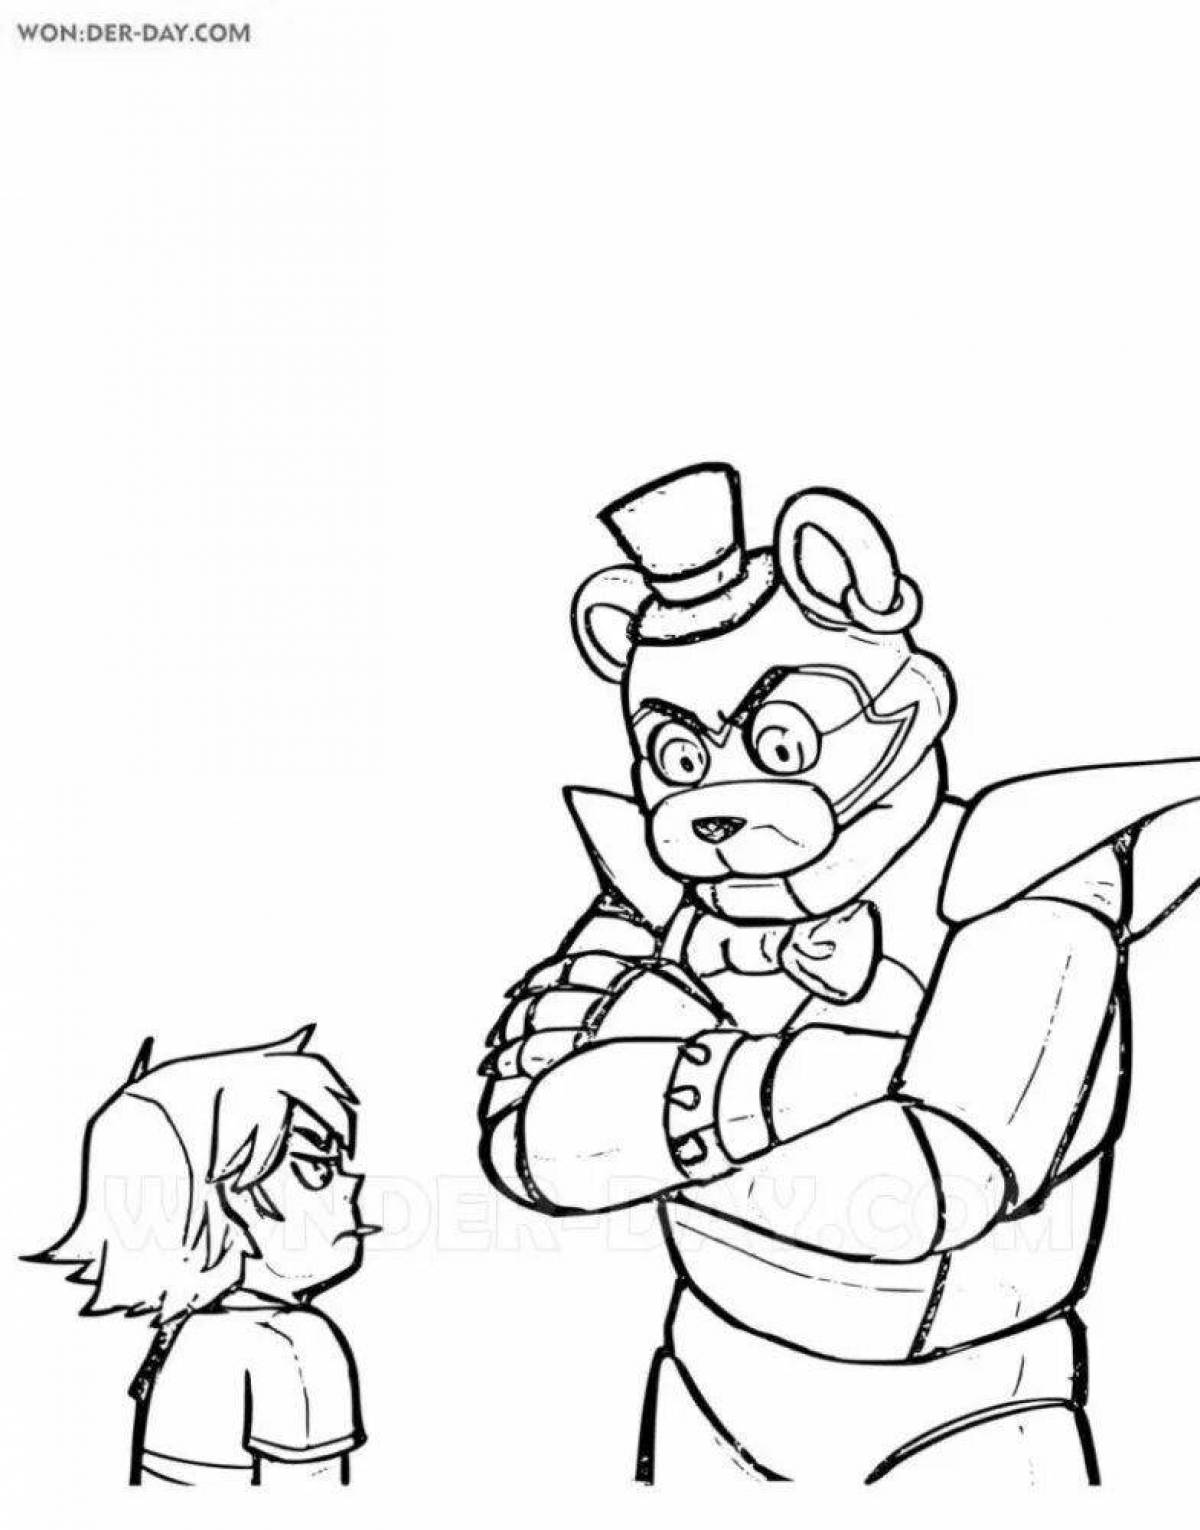 Funny fnaf security breach coloring page